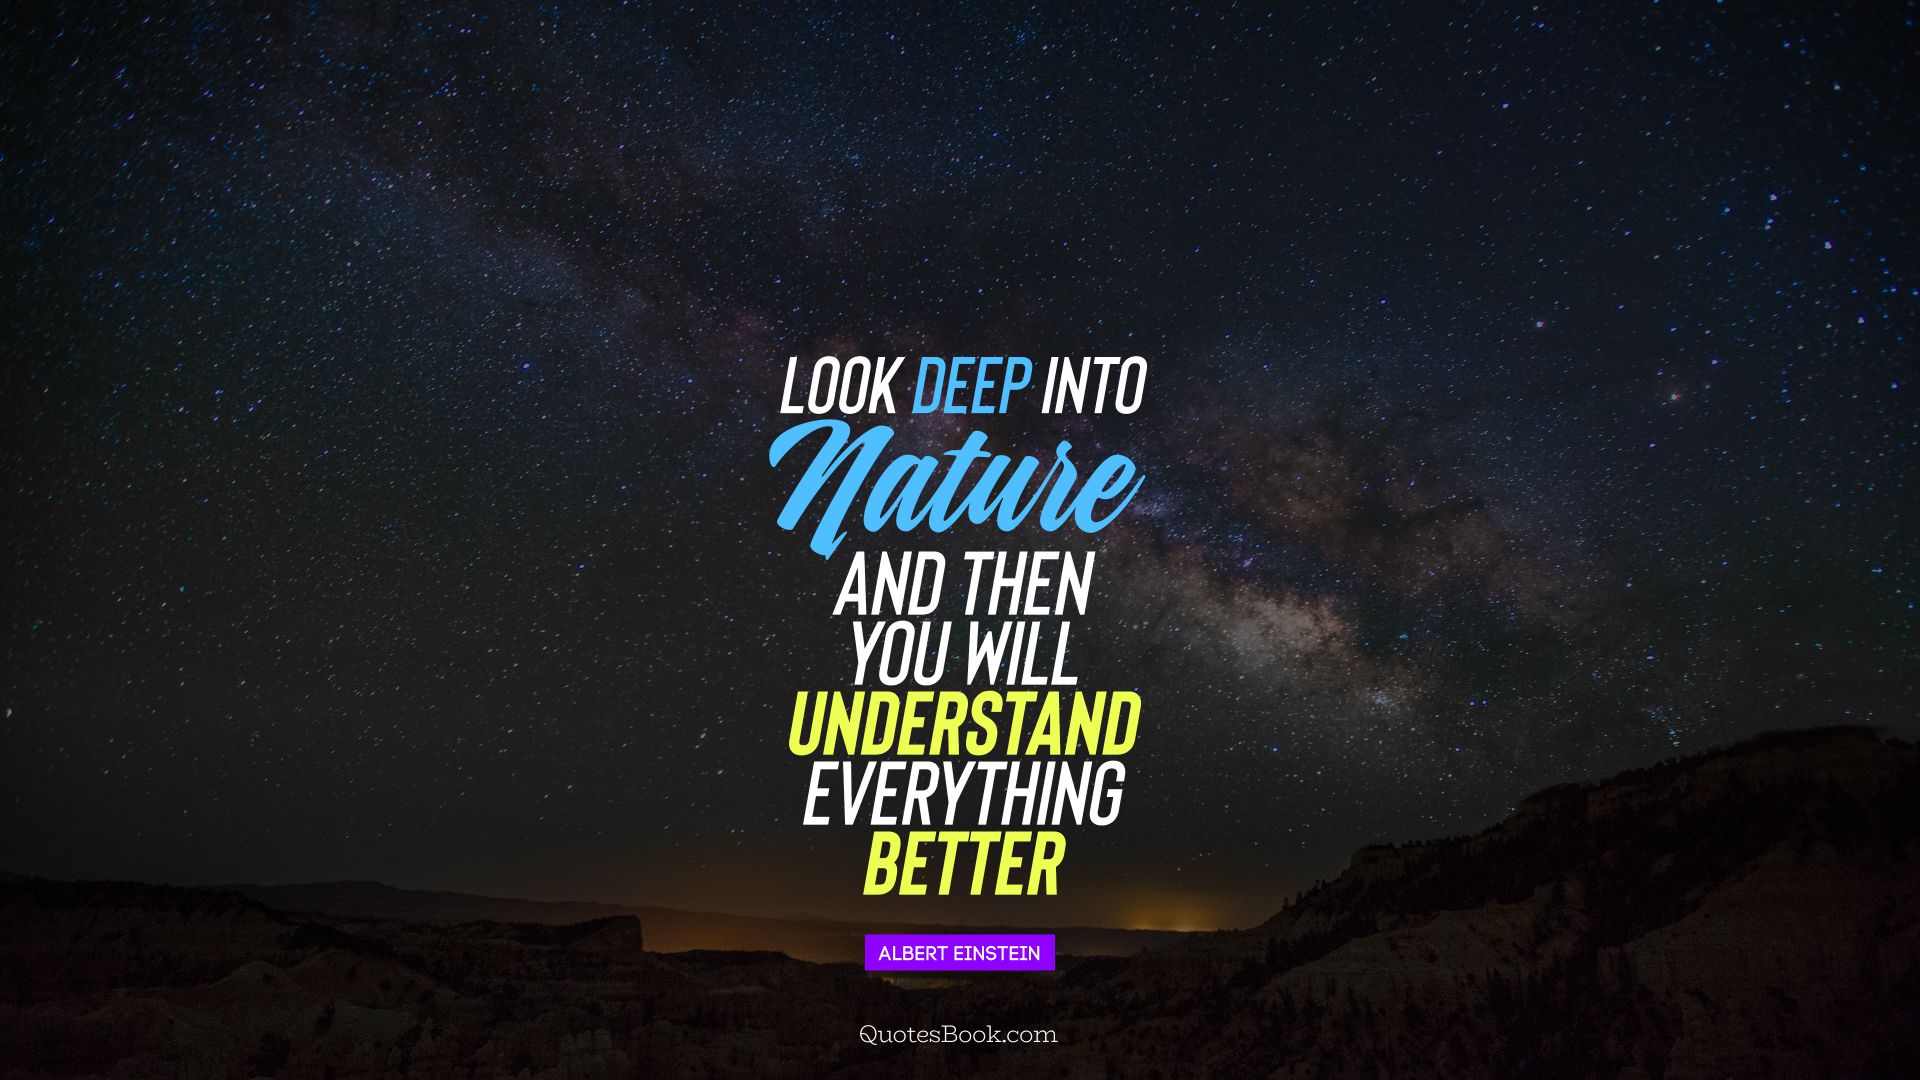 Look deep into nature, and then you will understand everything better . - Quote by Albert Einstein